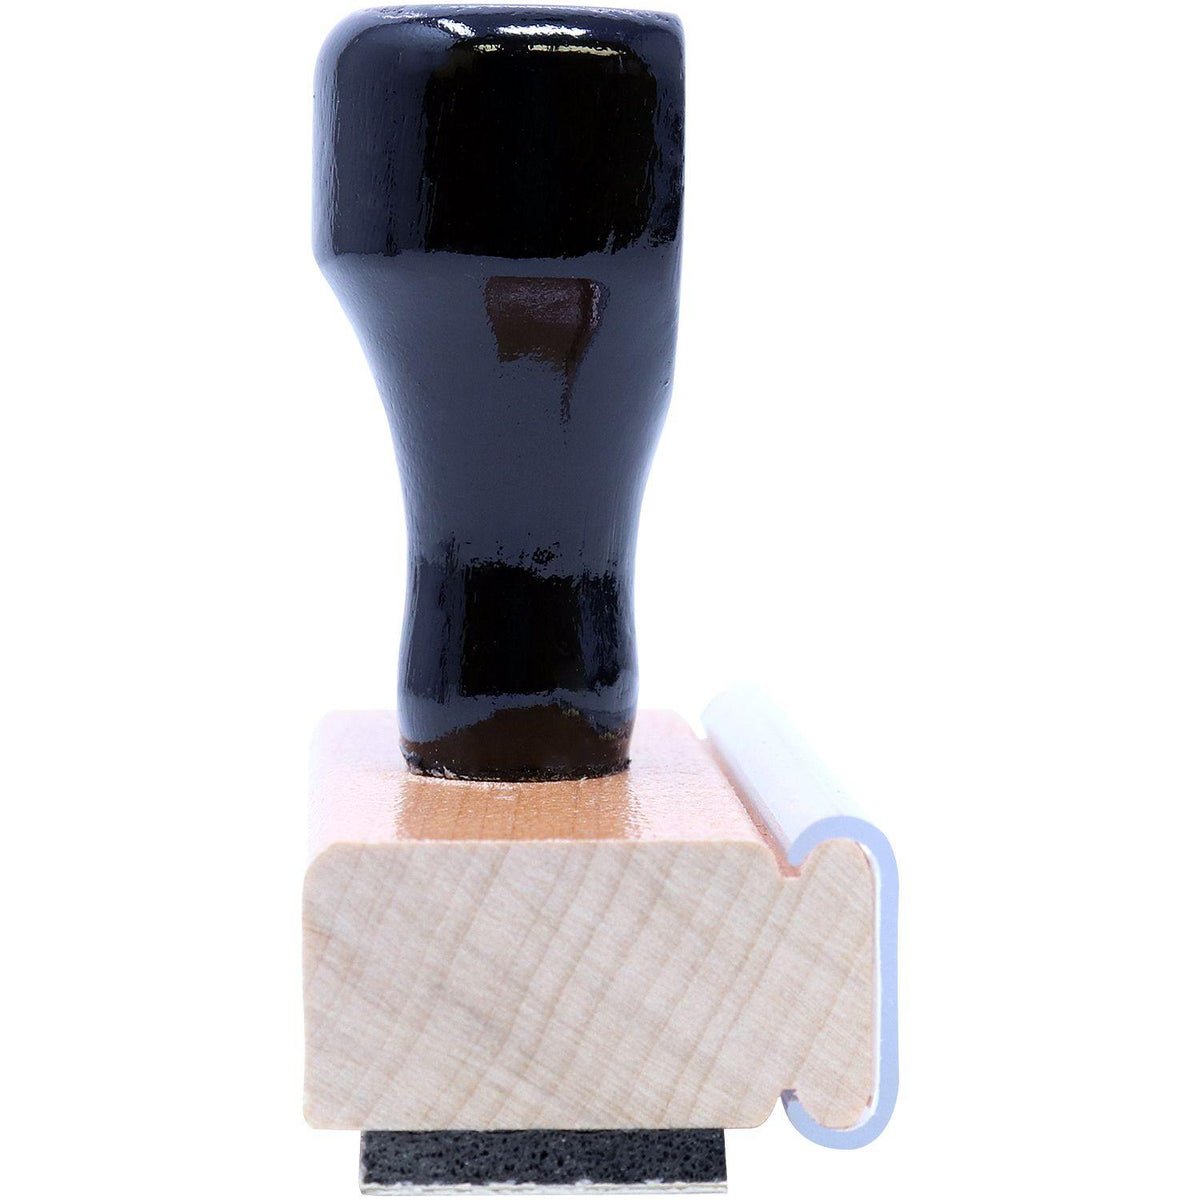 Side View of Large Despachado Rubber Stamp